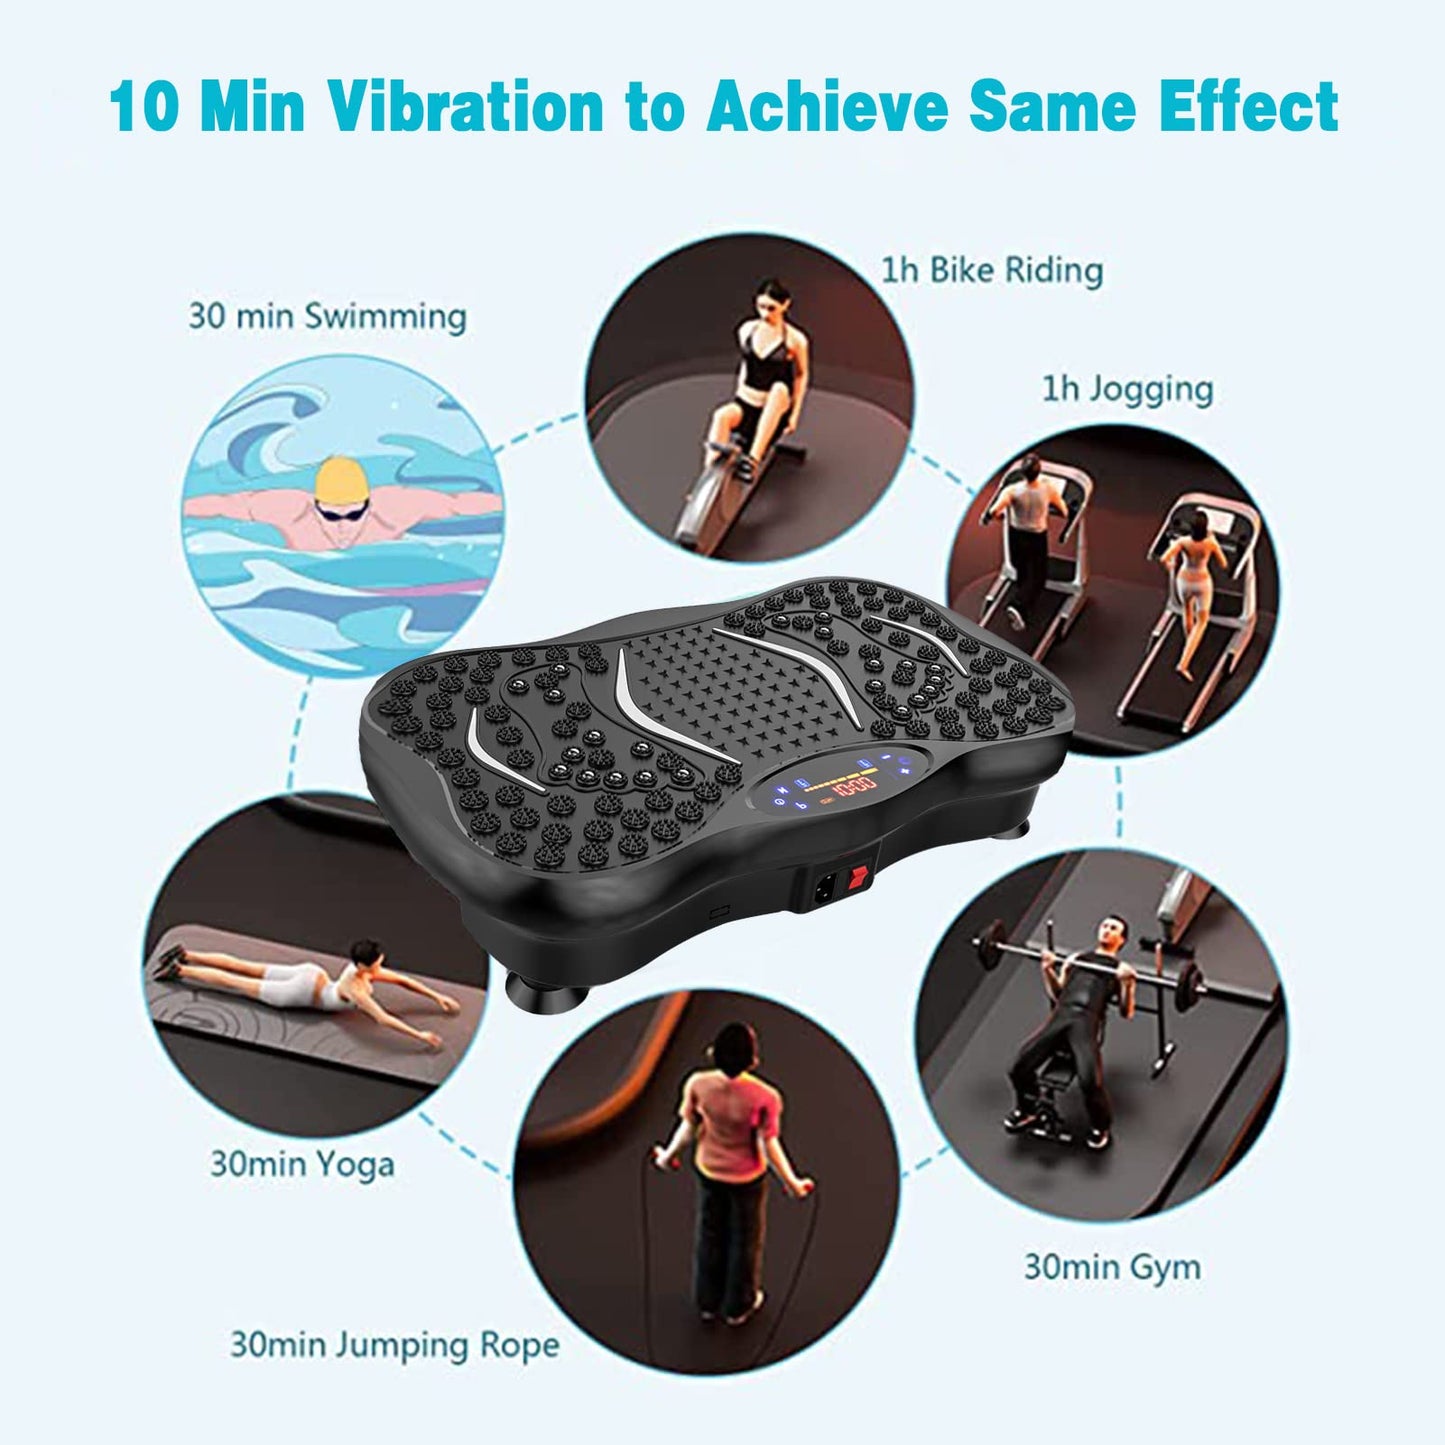 Professional Vibration Plate Exercise Machine, Whole Body Motion Vibration Platform, Home Training Equipment for Weight Loss & Toning, With LCD Display Remote Control & Balance Straps